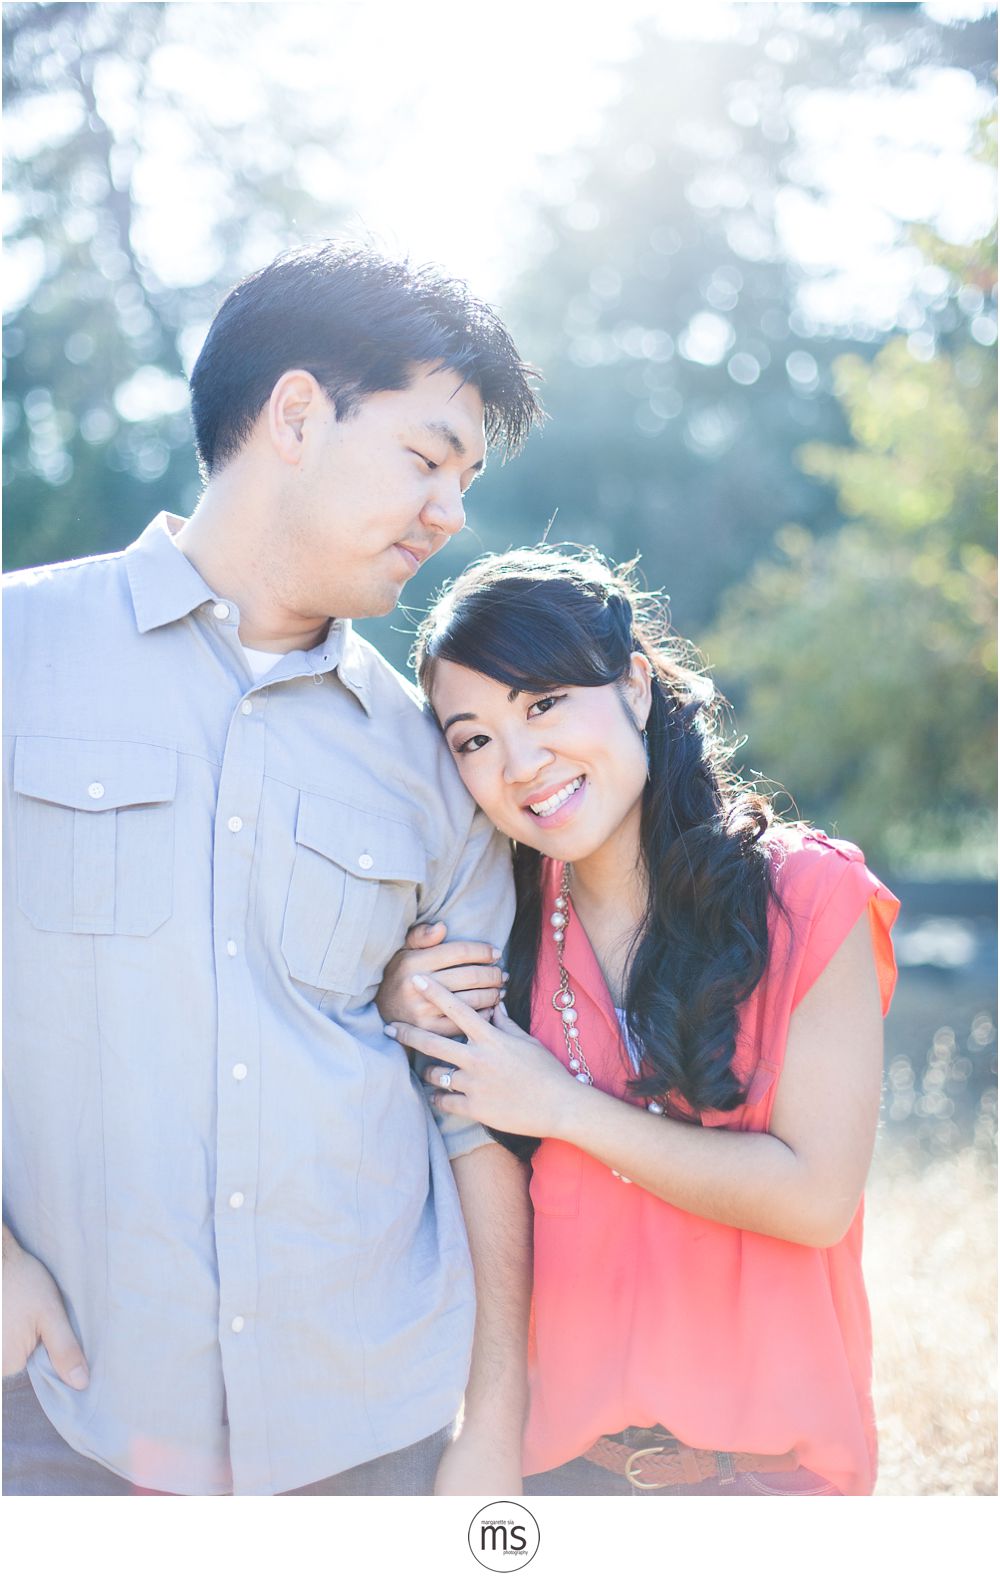 Sarah & Charles Engagement Portraits at Franklin Canyon Park Margarette Sia Photography_0006